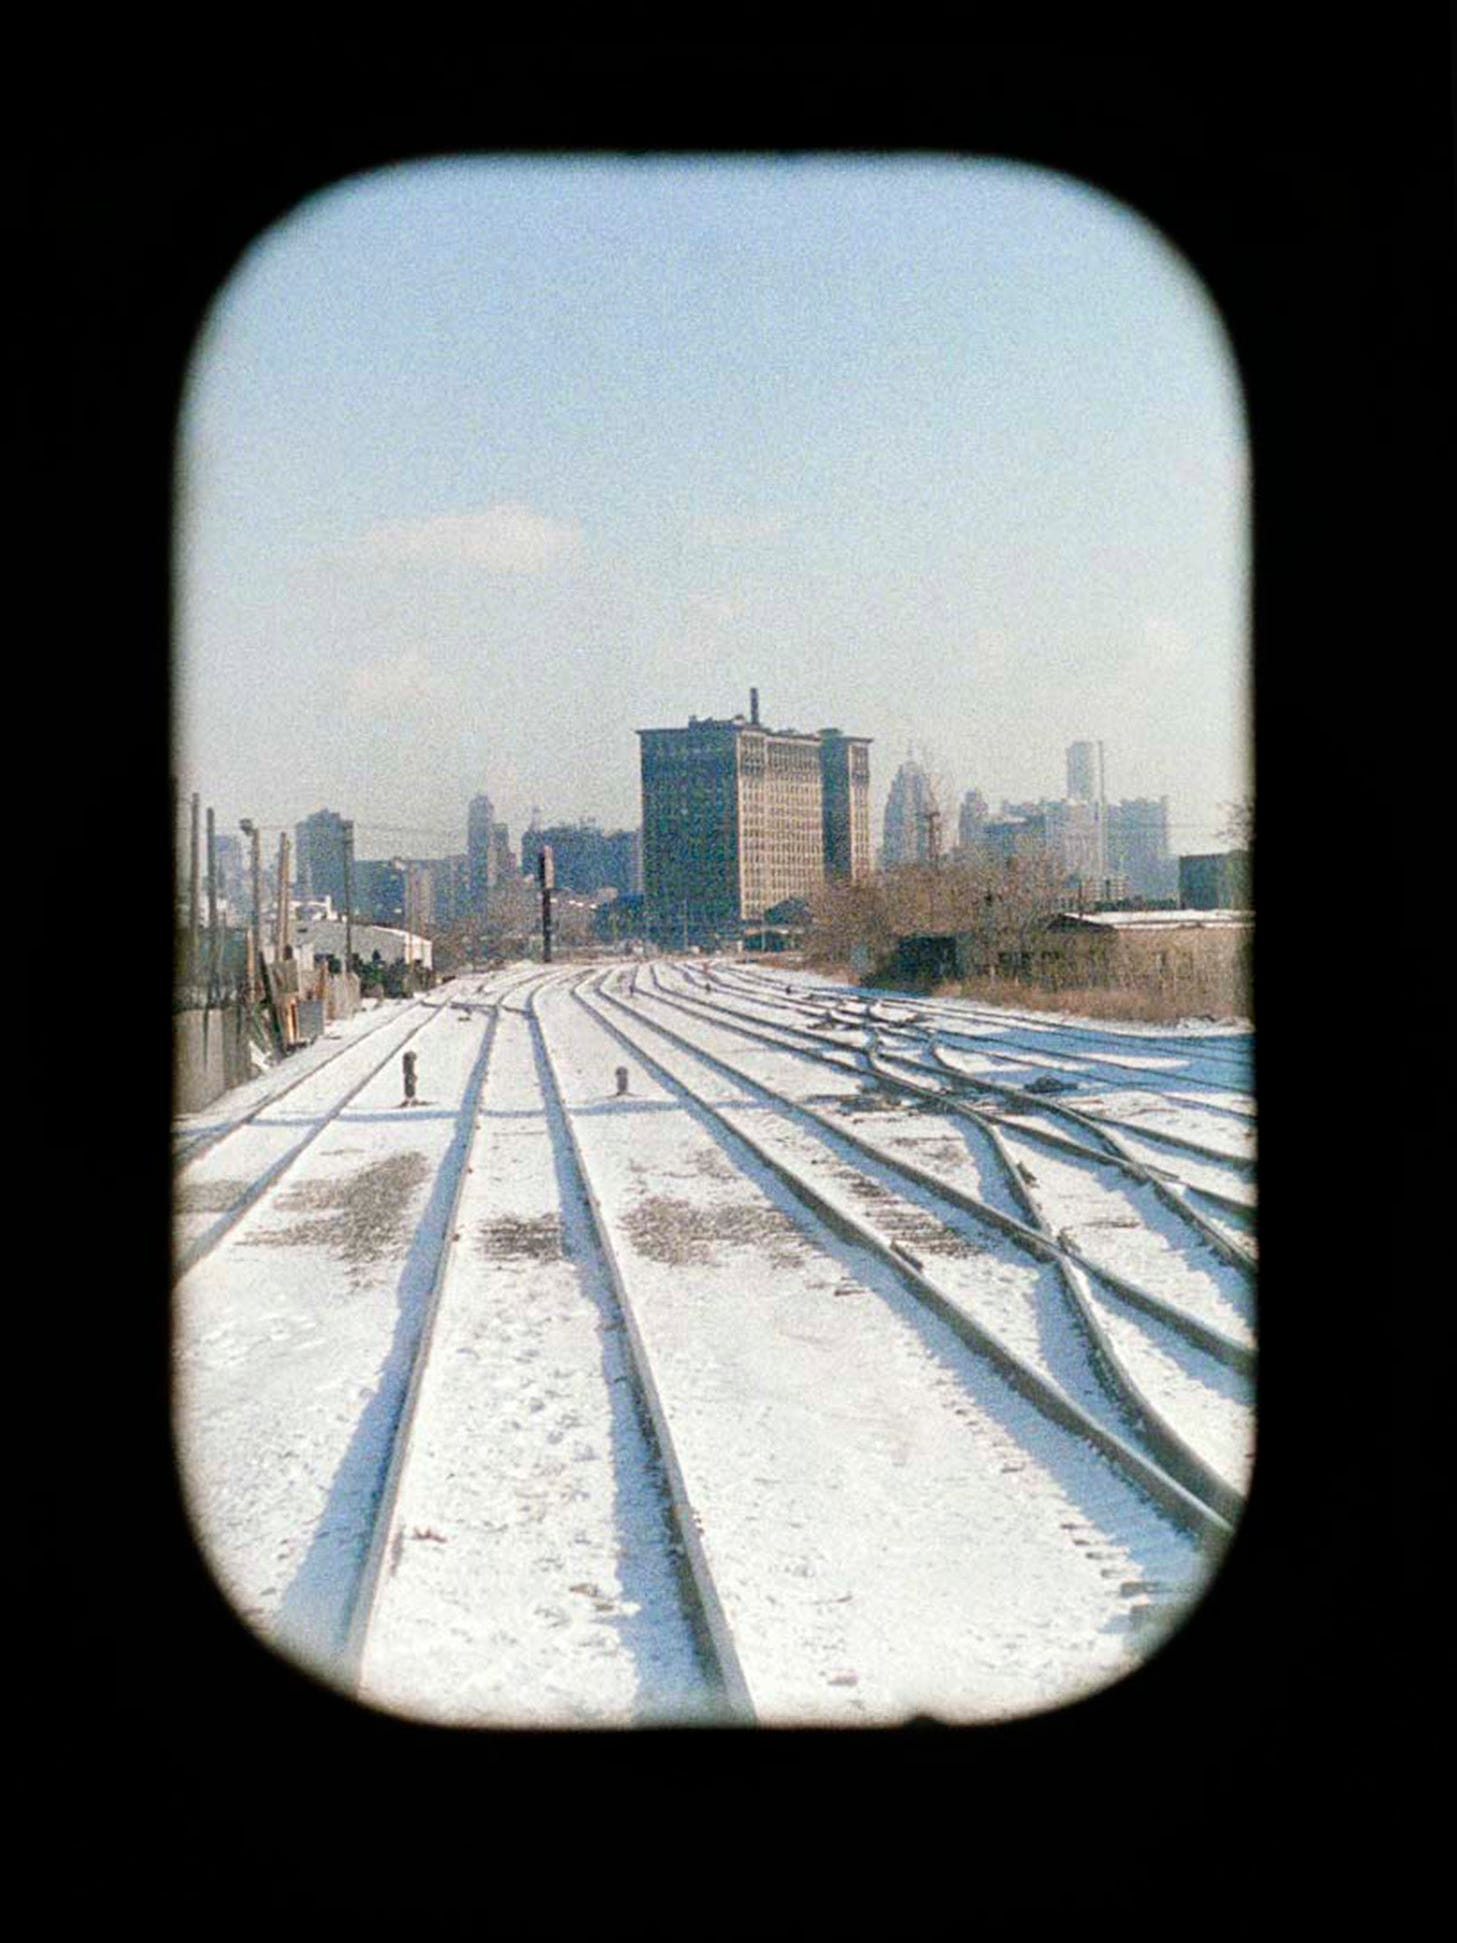 This is a passenger's view of Michigan Central Depot from the last train that left the station, Jan 5, 1987.